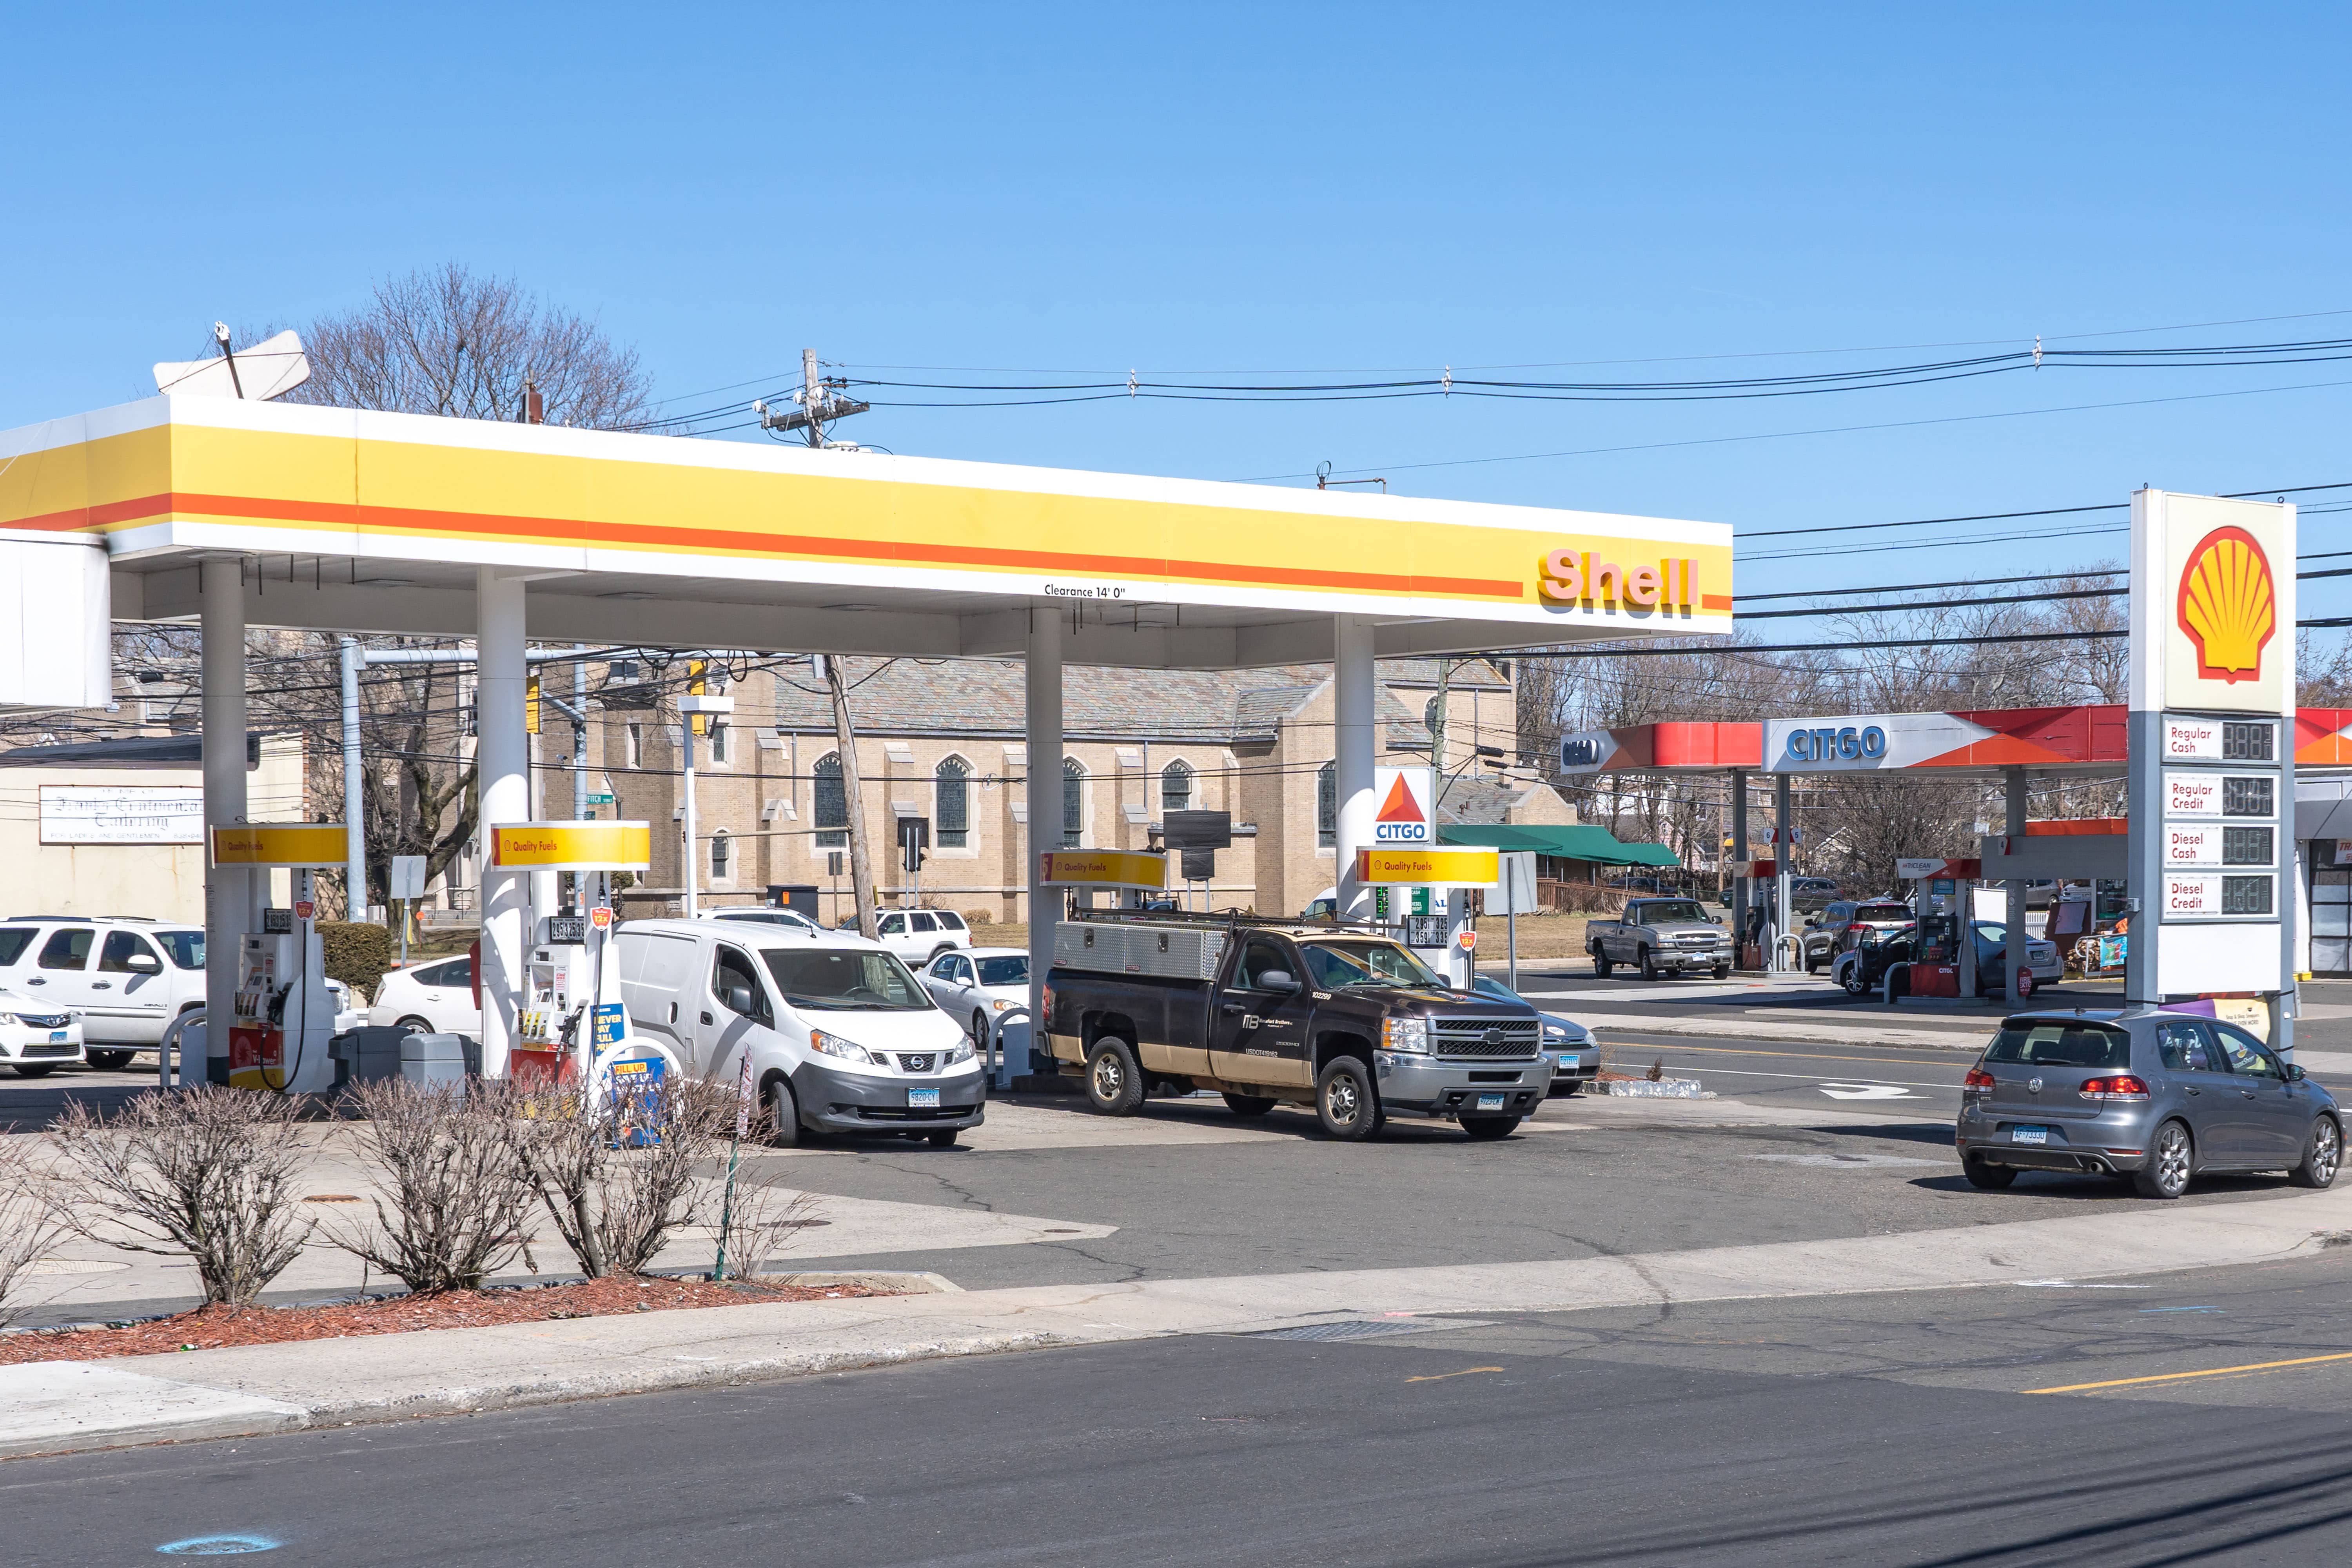 gas-prices-on-the-rise-in-norwalk-us-15-mar-2021